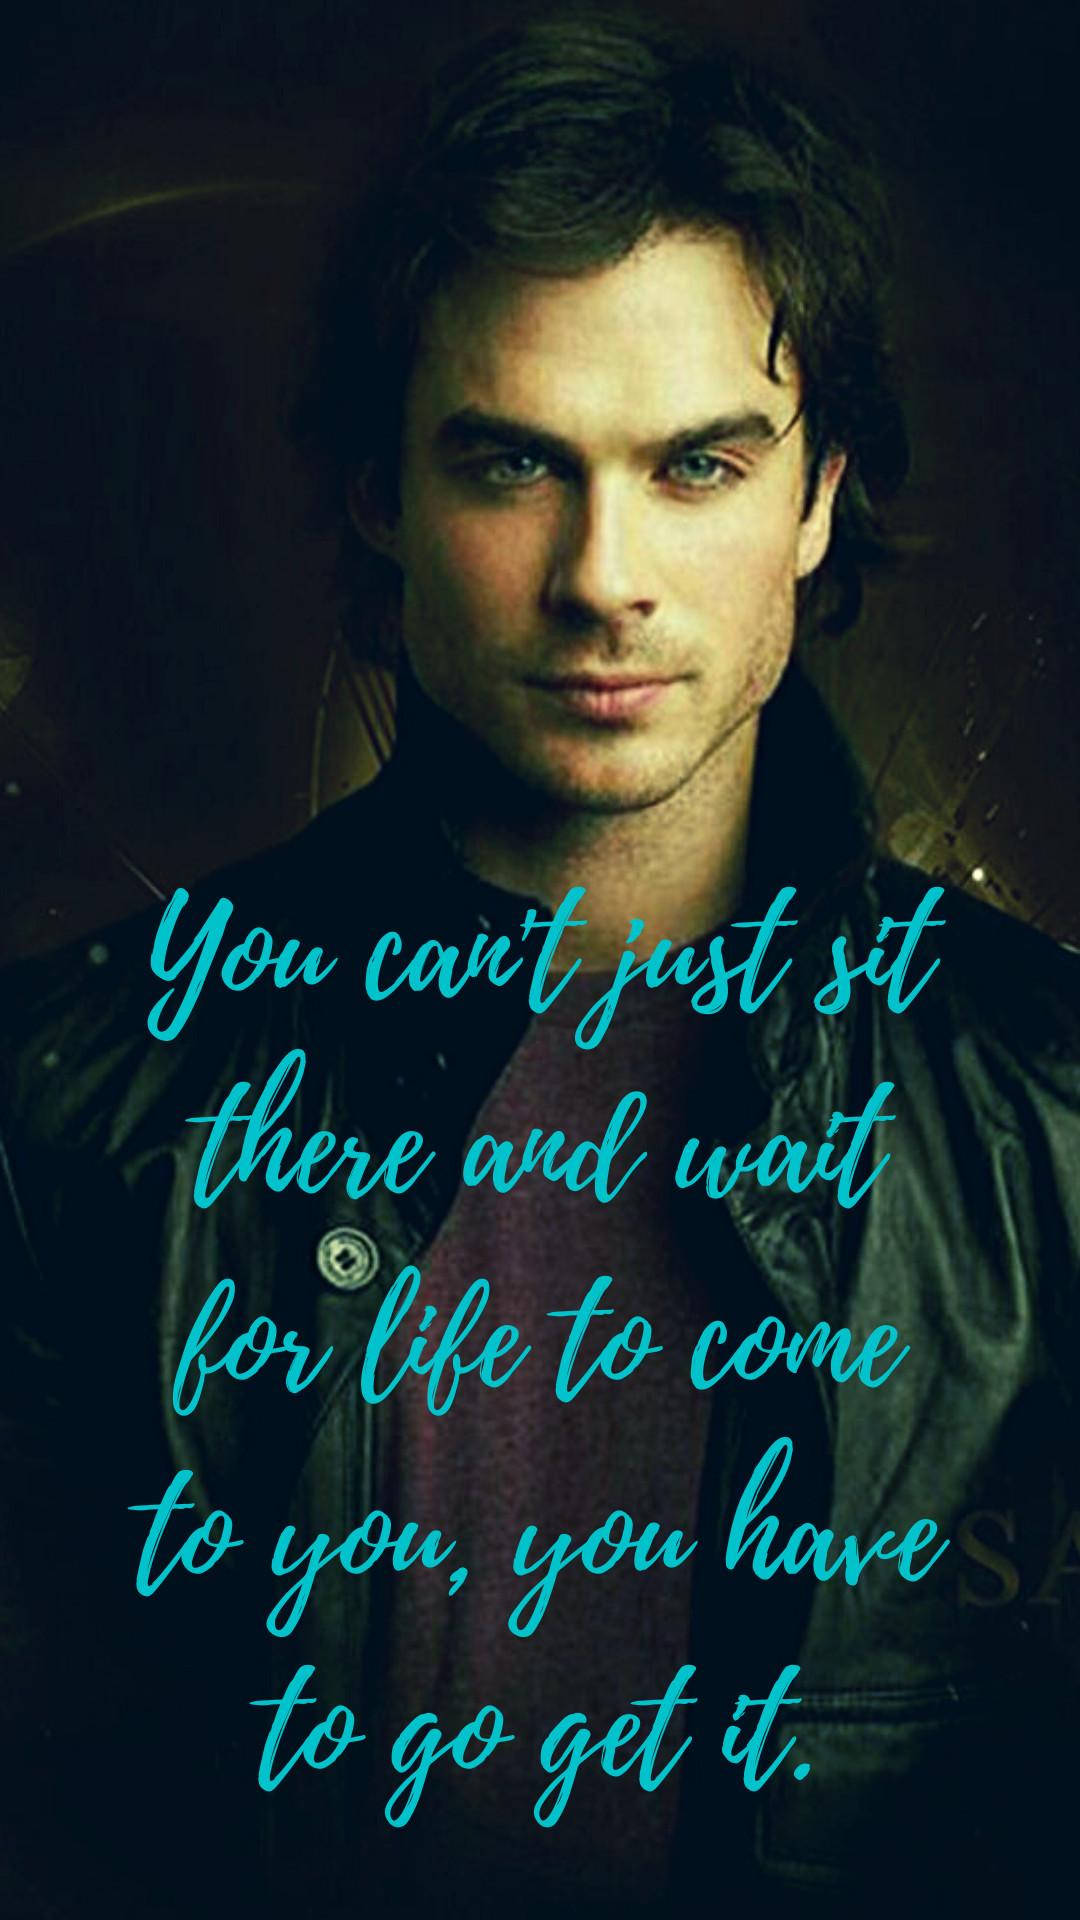 Damon Salvatore Funny Quotes
 8 Amazing Damon Salvatore Quotes That You Can Use As Phone